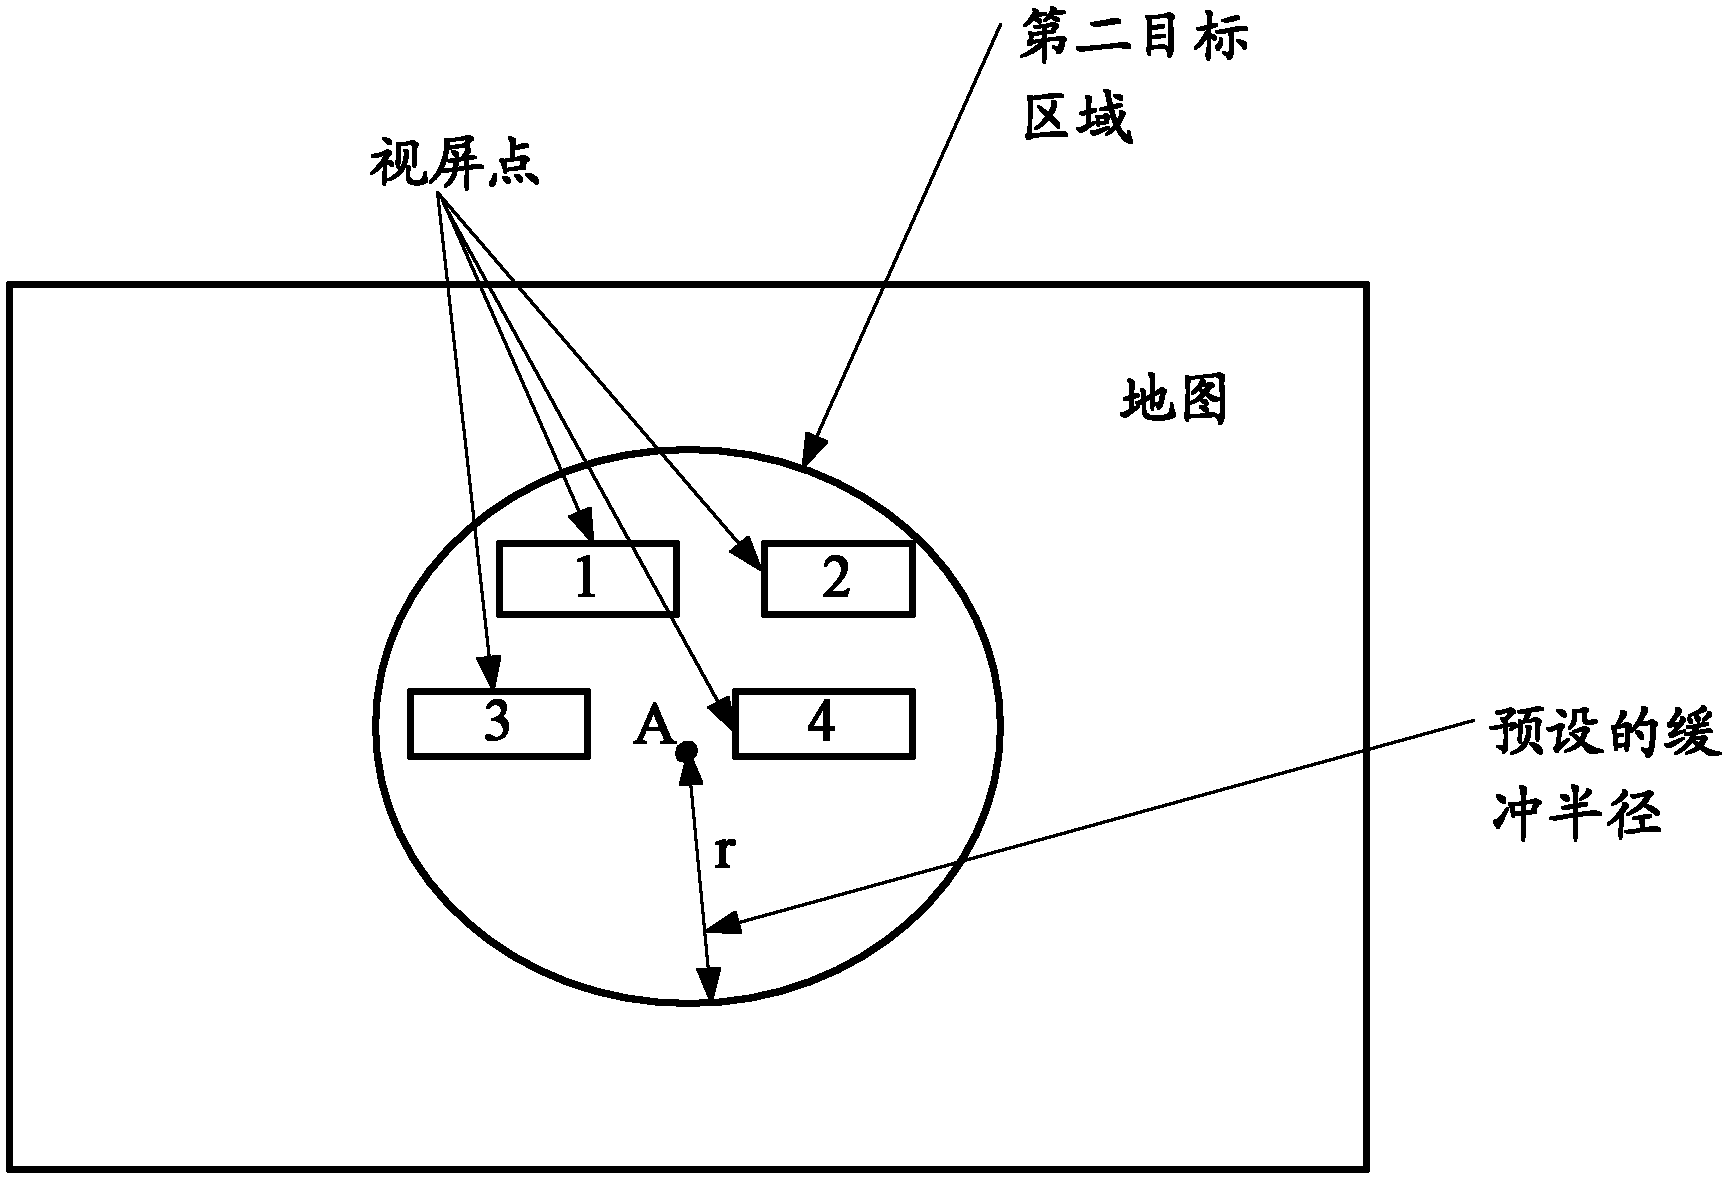 Video monitoring display method and device based on GIS (Geographic Information System) map